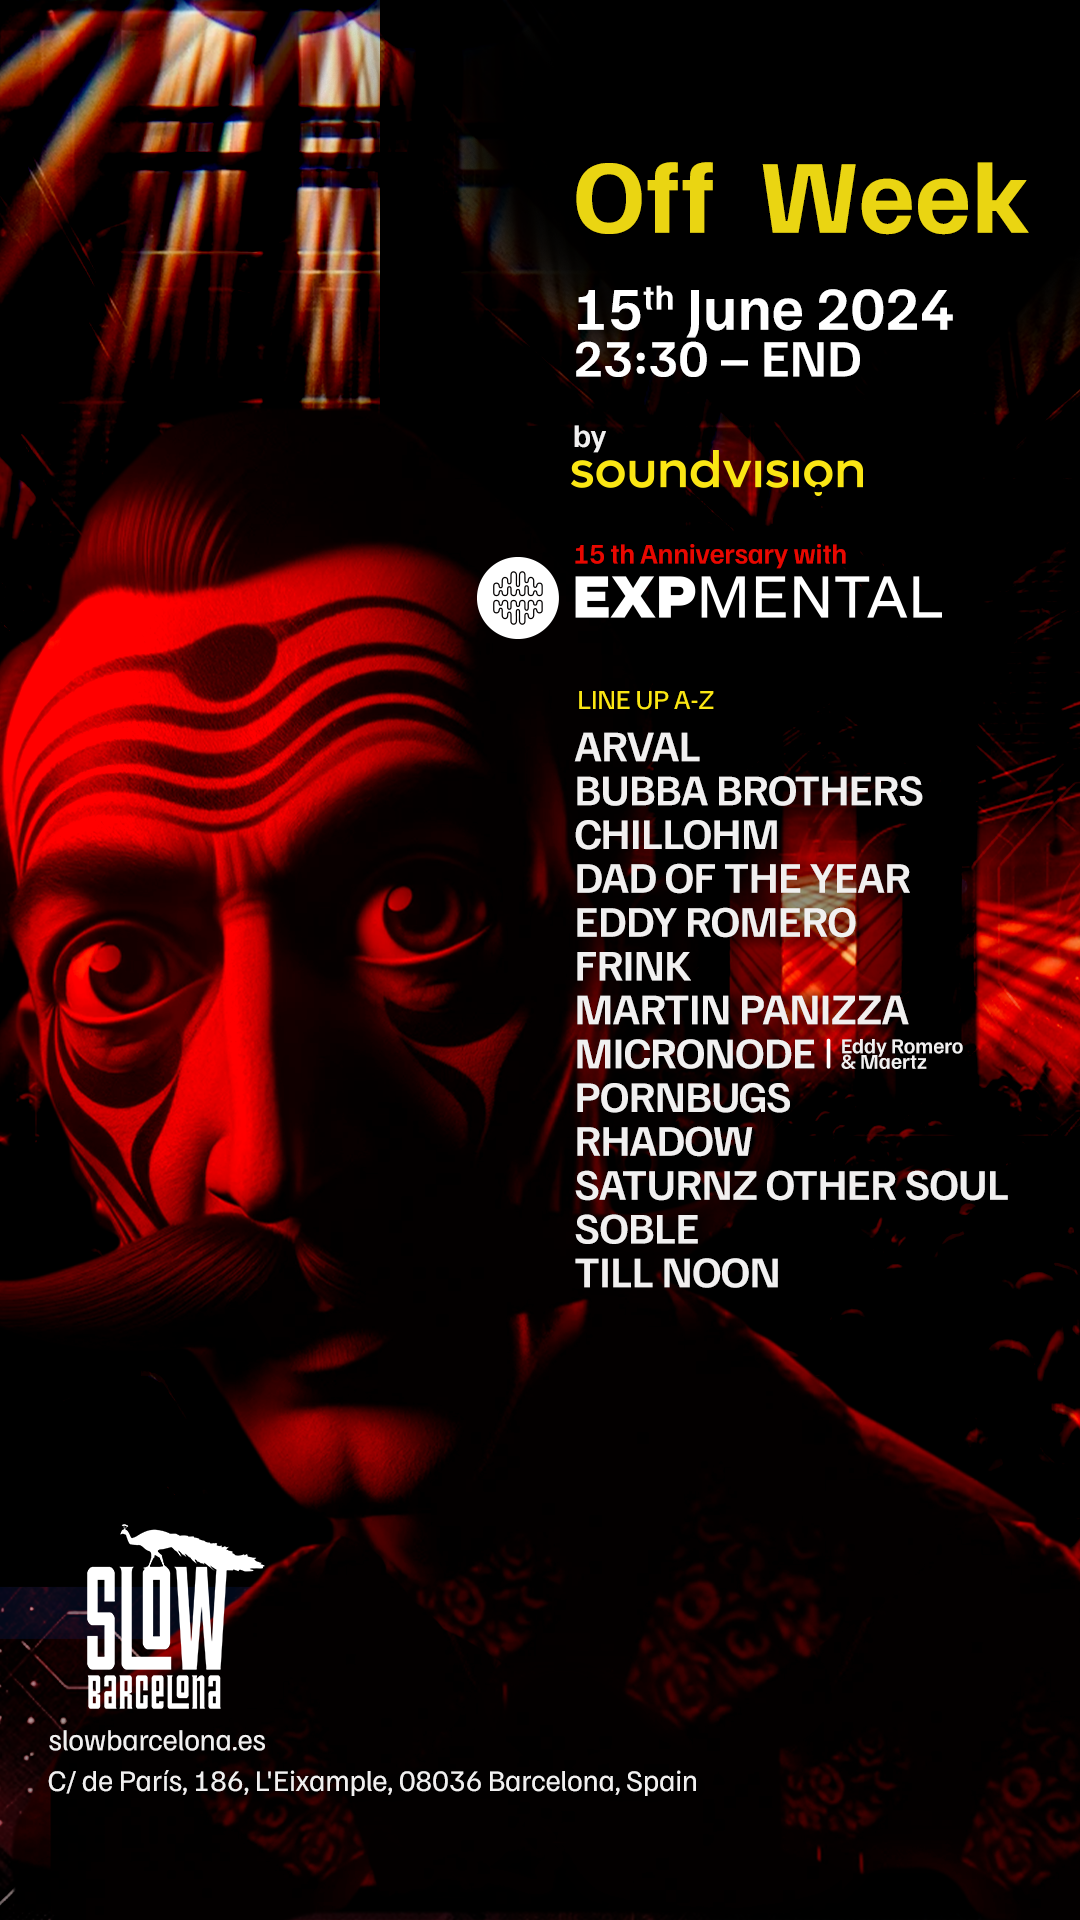 Expemtal by Soundvision OFF WEEK Showcase - Página trasera